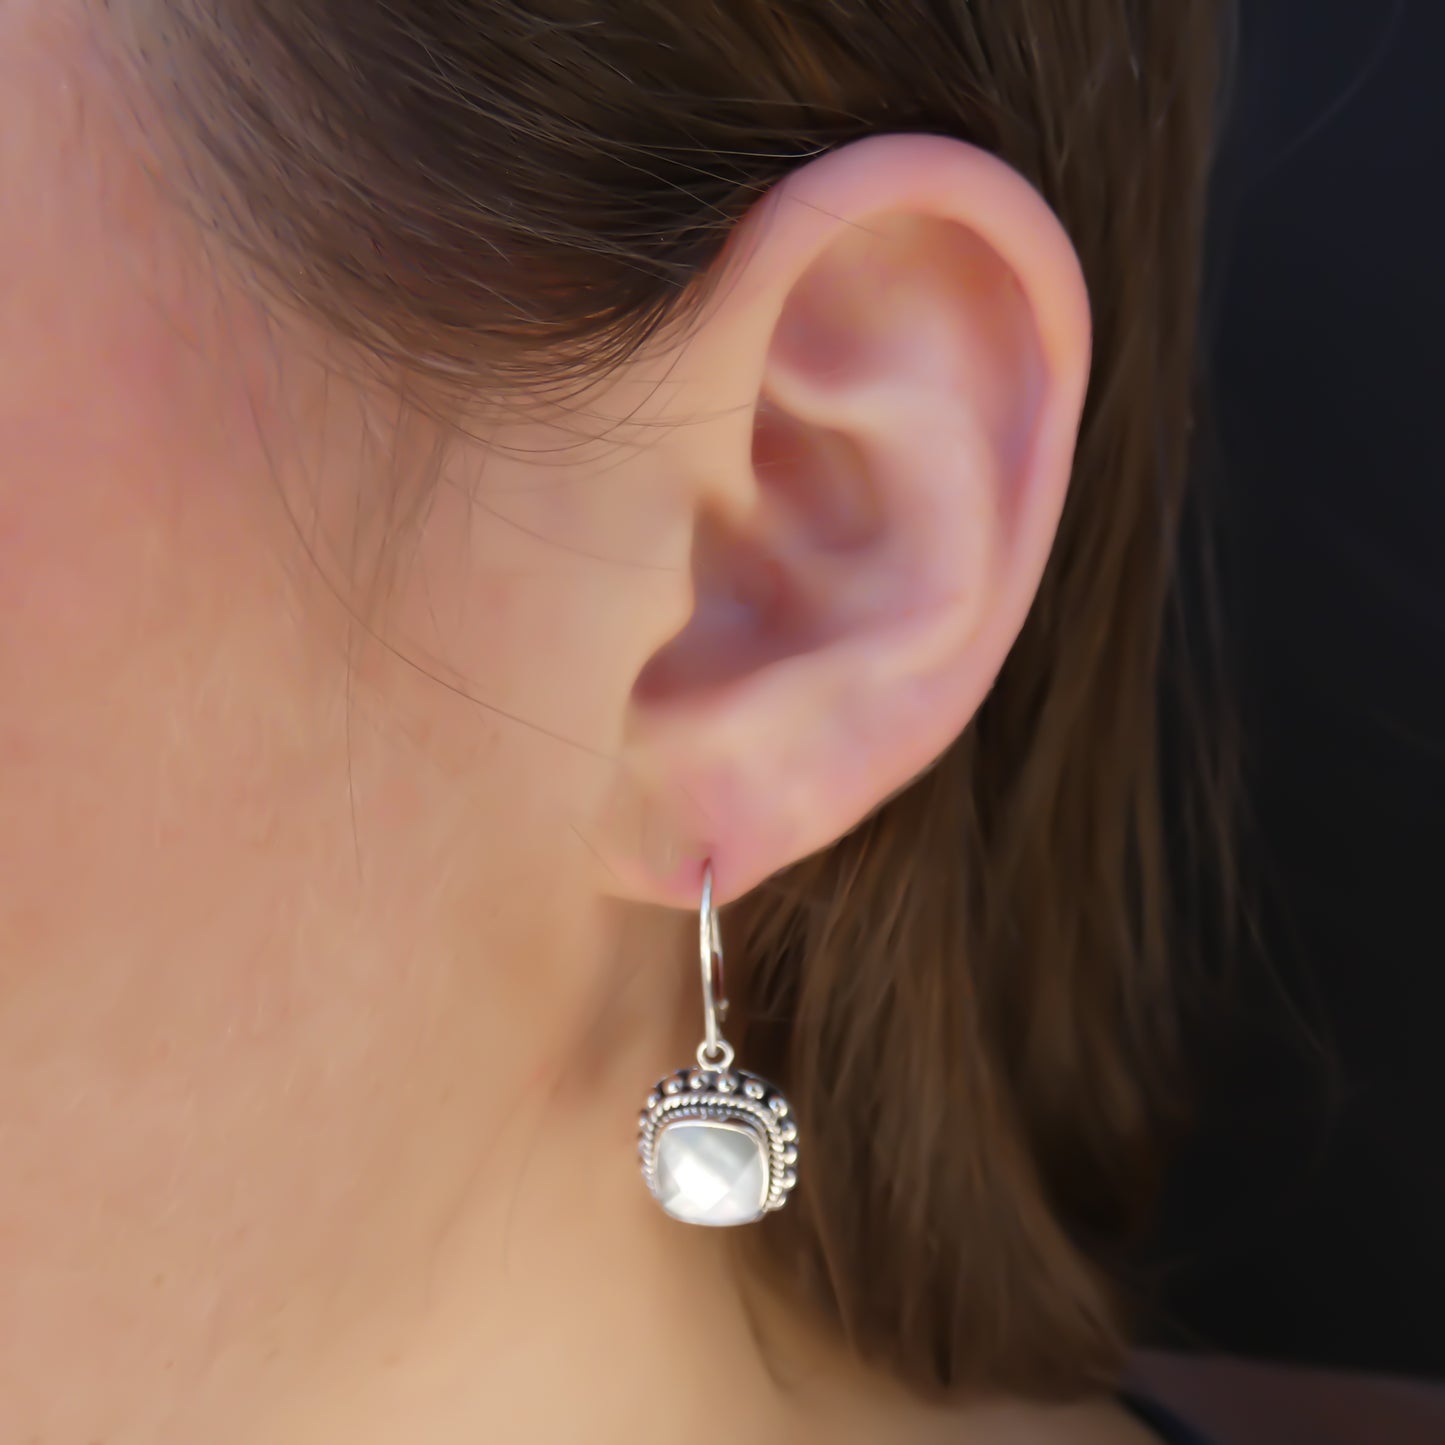 Woman wearing silver earrings with square mother of pearl doublet gemstones.